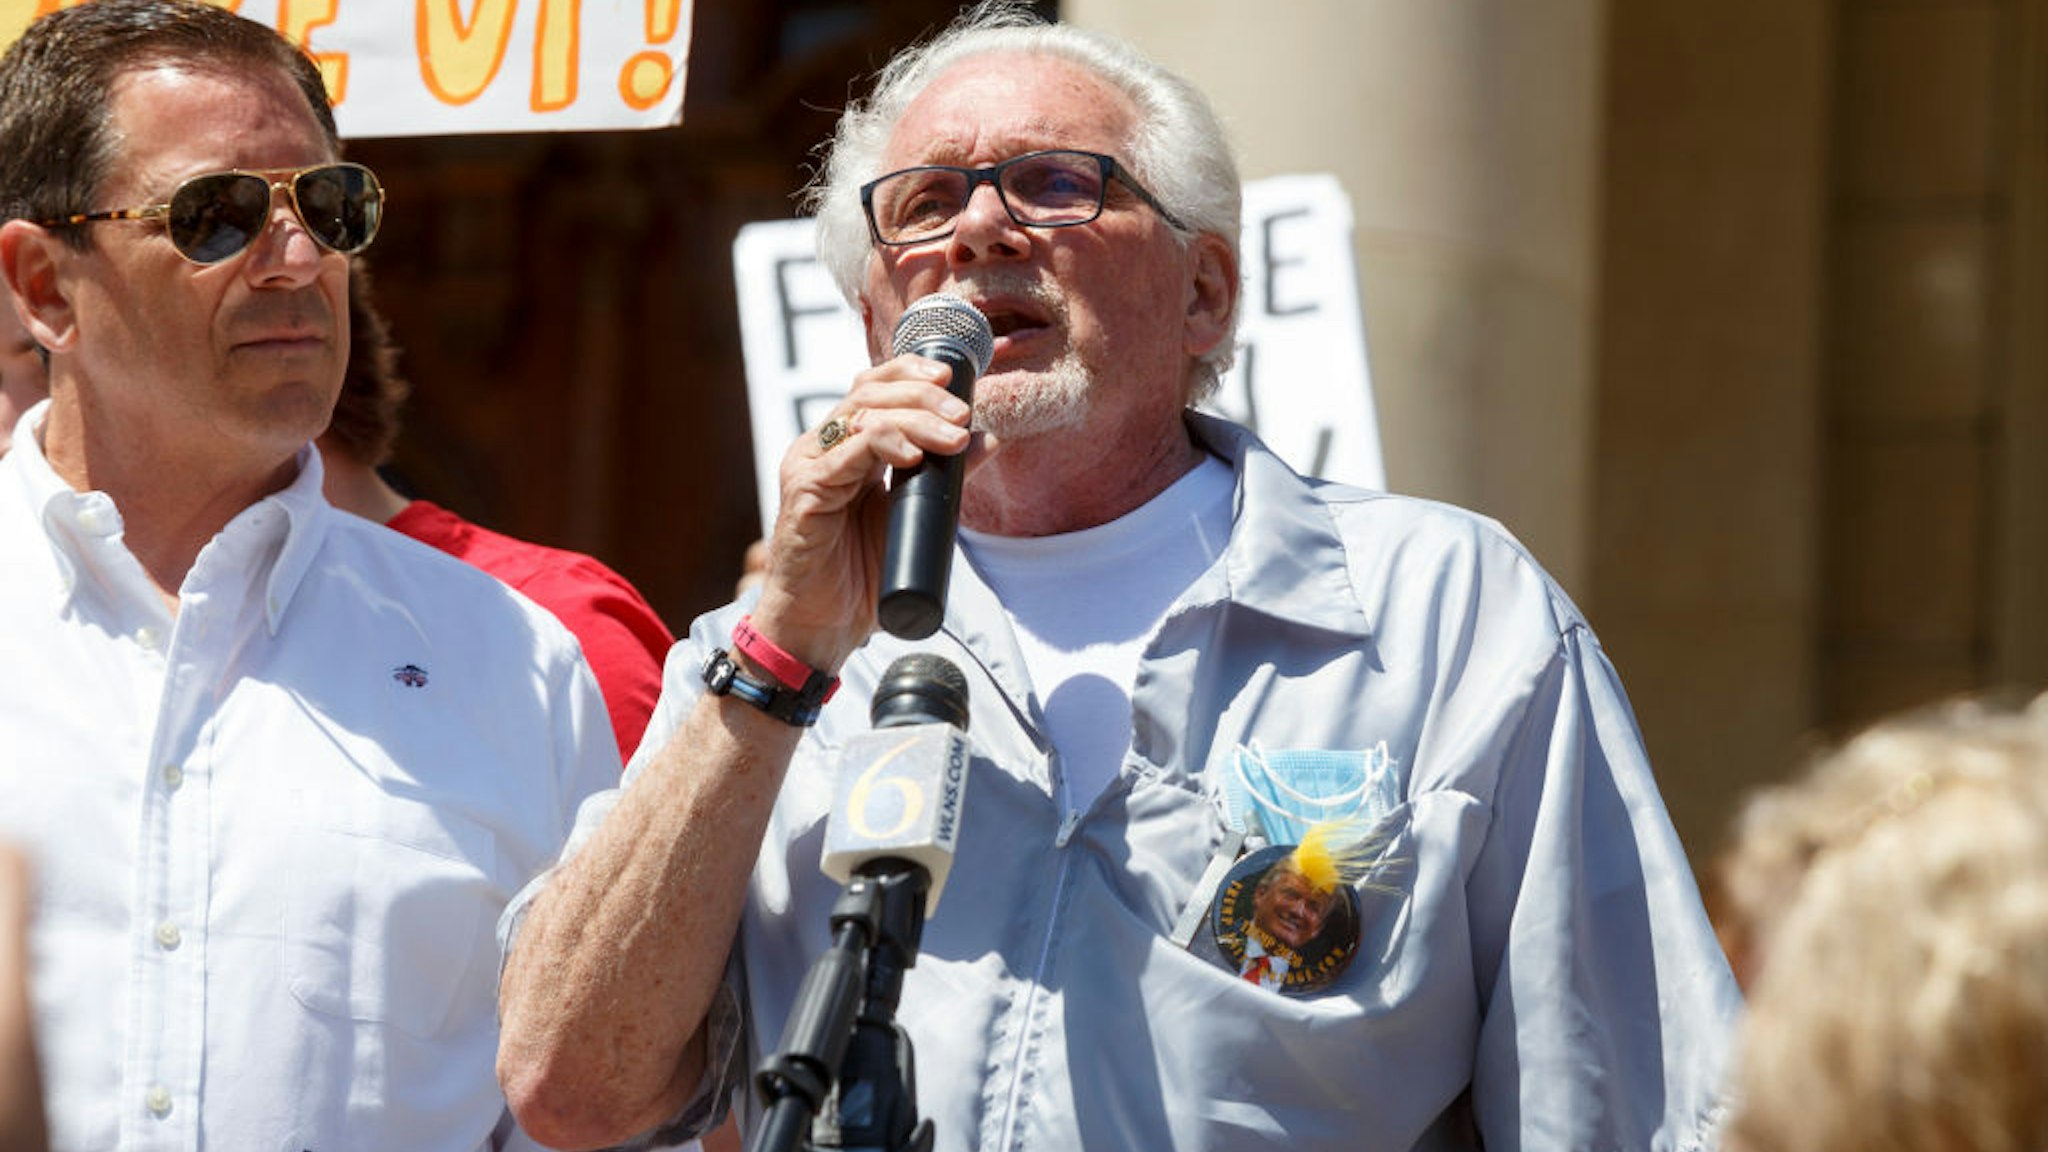 LANSING, MI - MAY 20: Owosso barber, Karl Manke, gives a speech before cutting hair for free on the steps of the state Capitol during Operation Haircut on May 20, 2020 in Lansing, Michigan. The event was a protest planned by the Michigan Conservative Coalition in response to an Owosso barber, Karl Manke, whose business license was taken away after he violated the stay-at-home order by reopening. The protest is part of a growing national movement against stay-at-home orders that are designed to help slow the spread of the coronavirus (COVID-19). (Photo by Elaine Cromie/Getty Images)